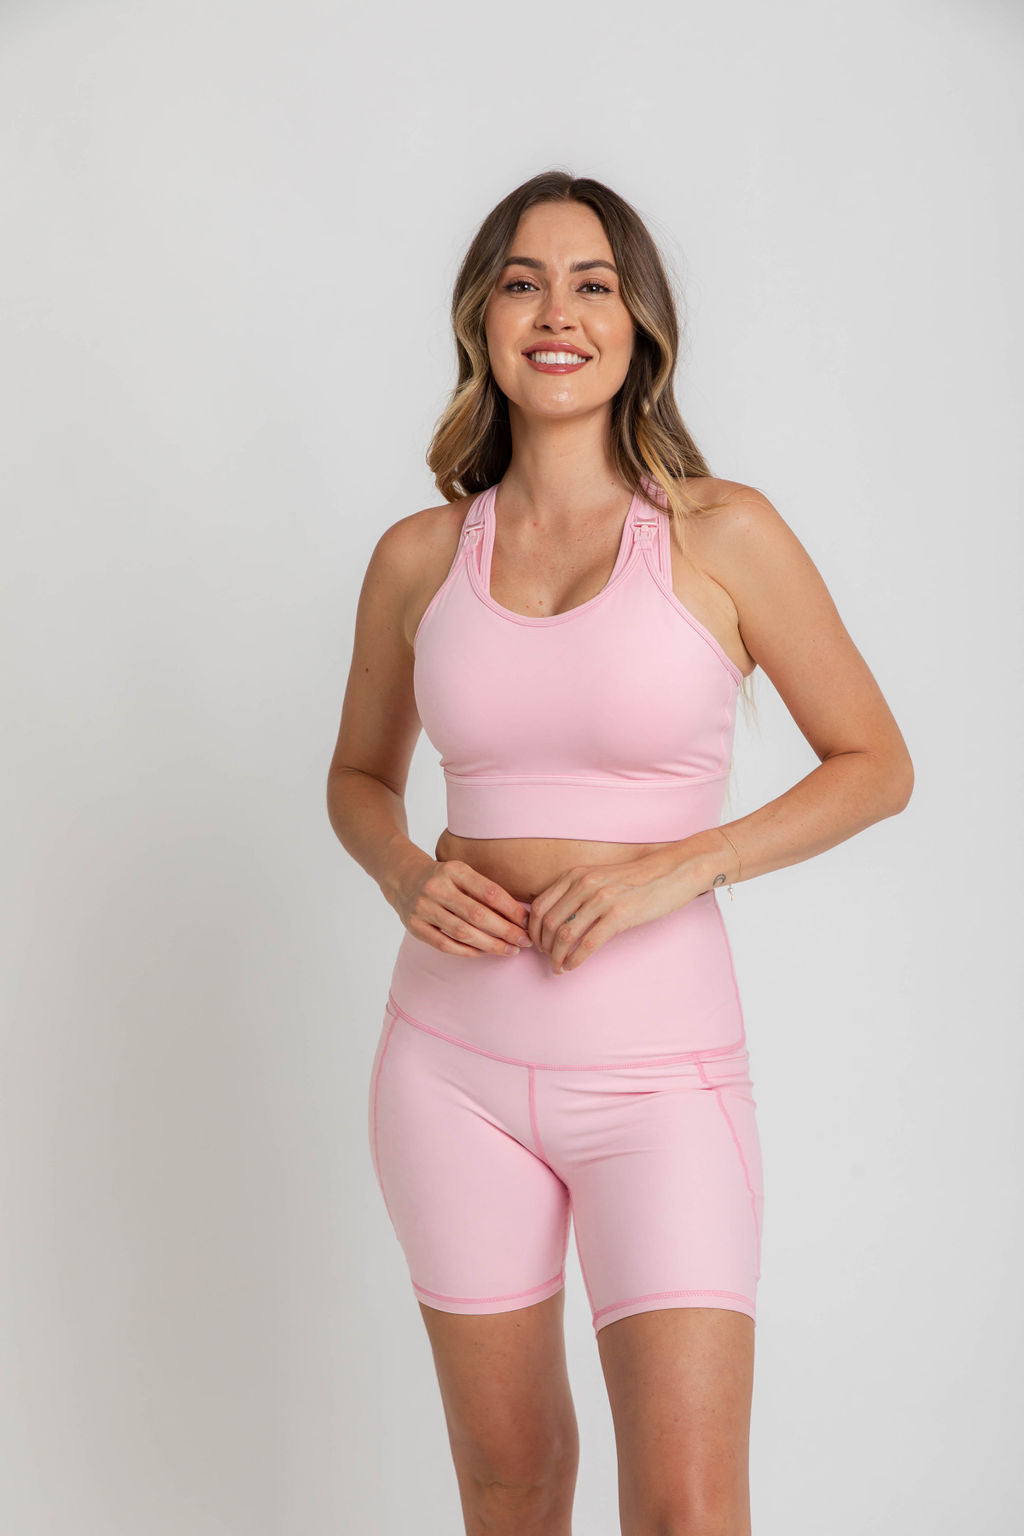 NURSING SPORTS BRA - "THE ULTIMATE" MAXIMUM SUPPORT + MAX COVERAGE - BABY PINK